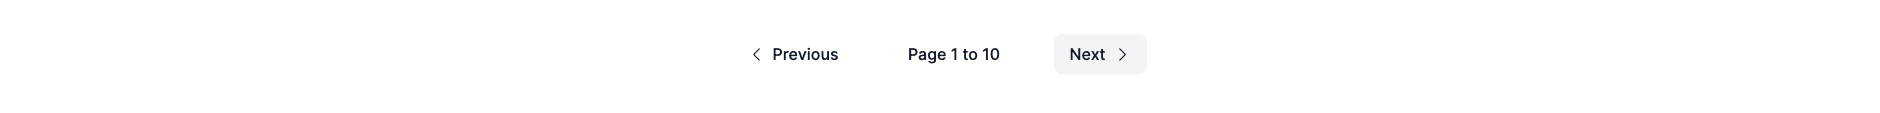 Pagination Style 5